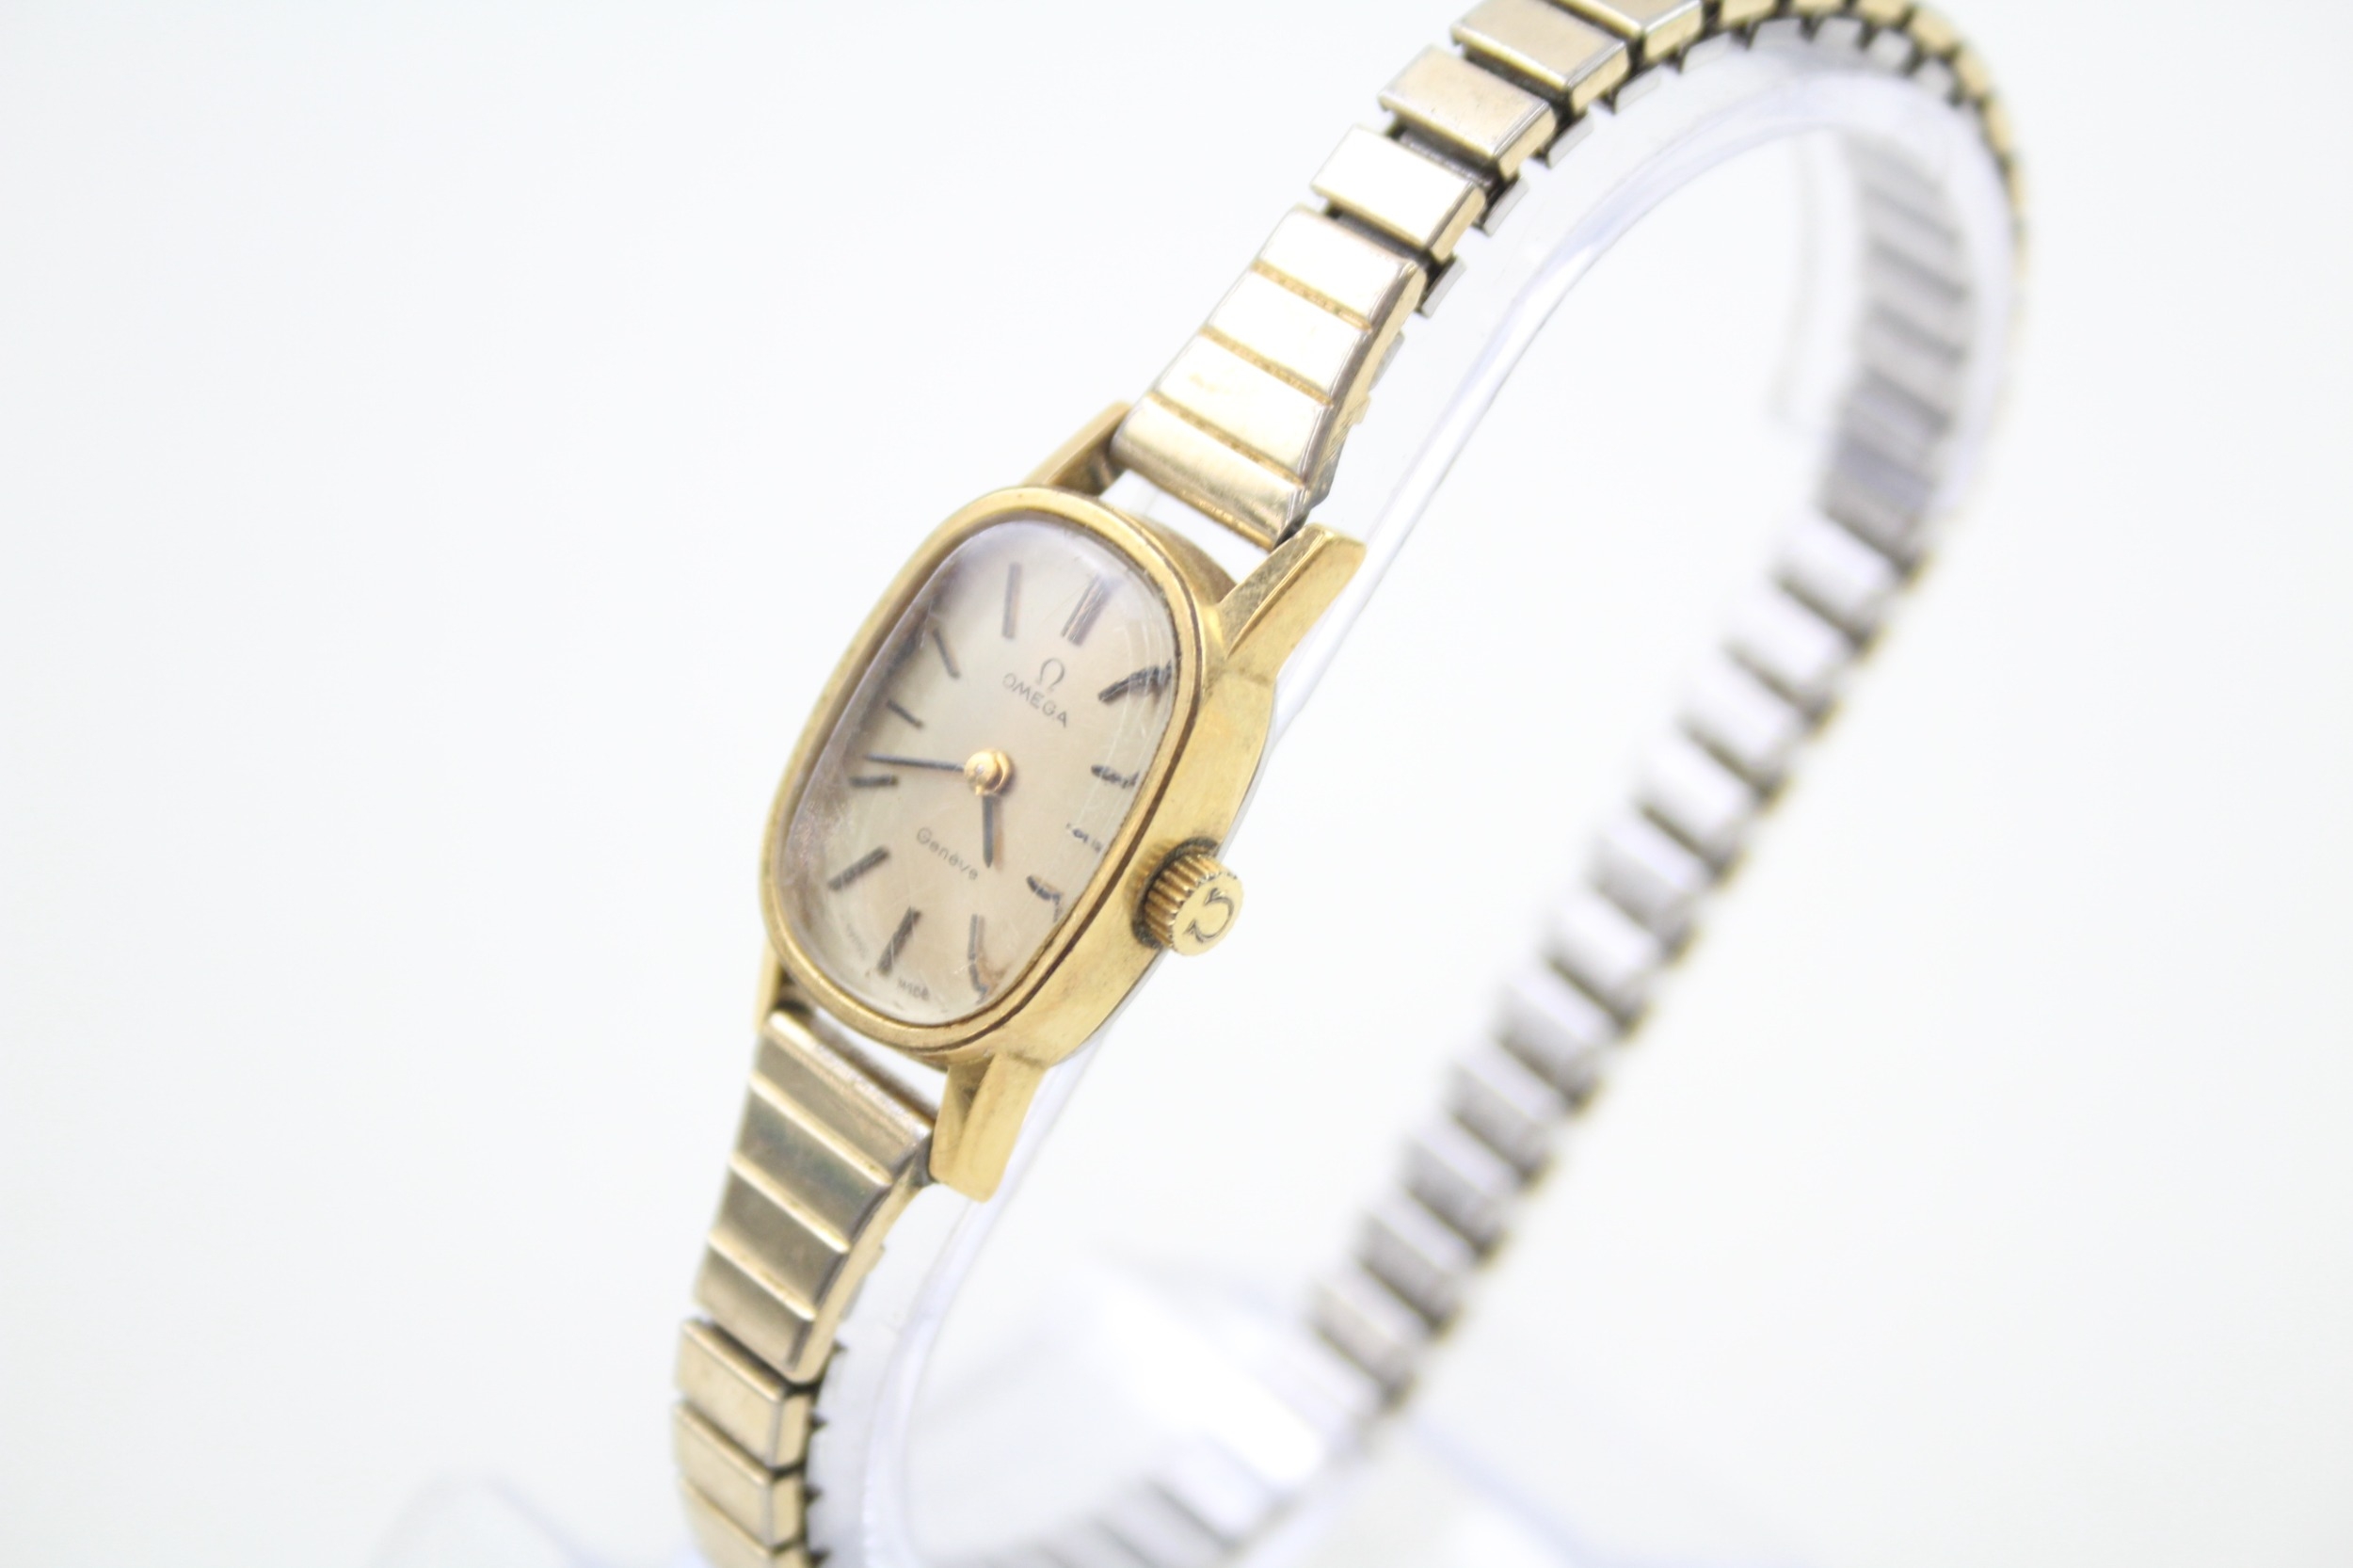 Womens Omega Geneve Gold Tone Wristwatch Hand Wind WORKING - Image 3 of 7